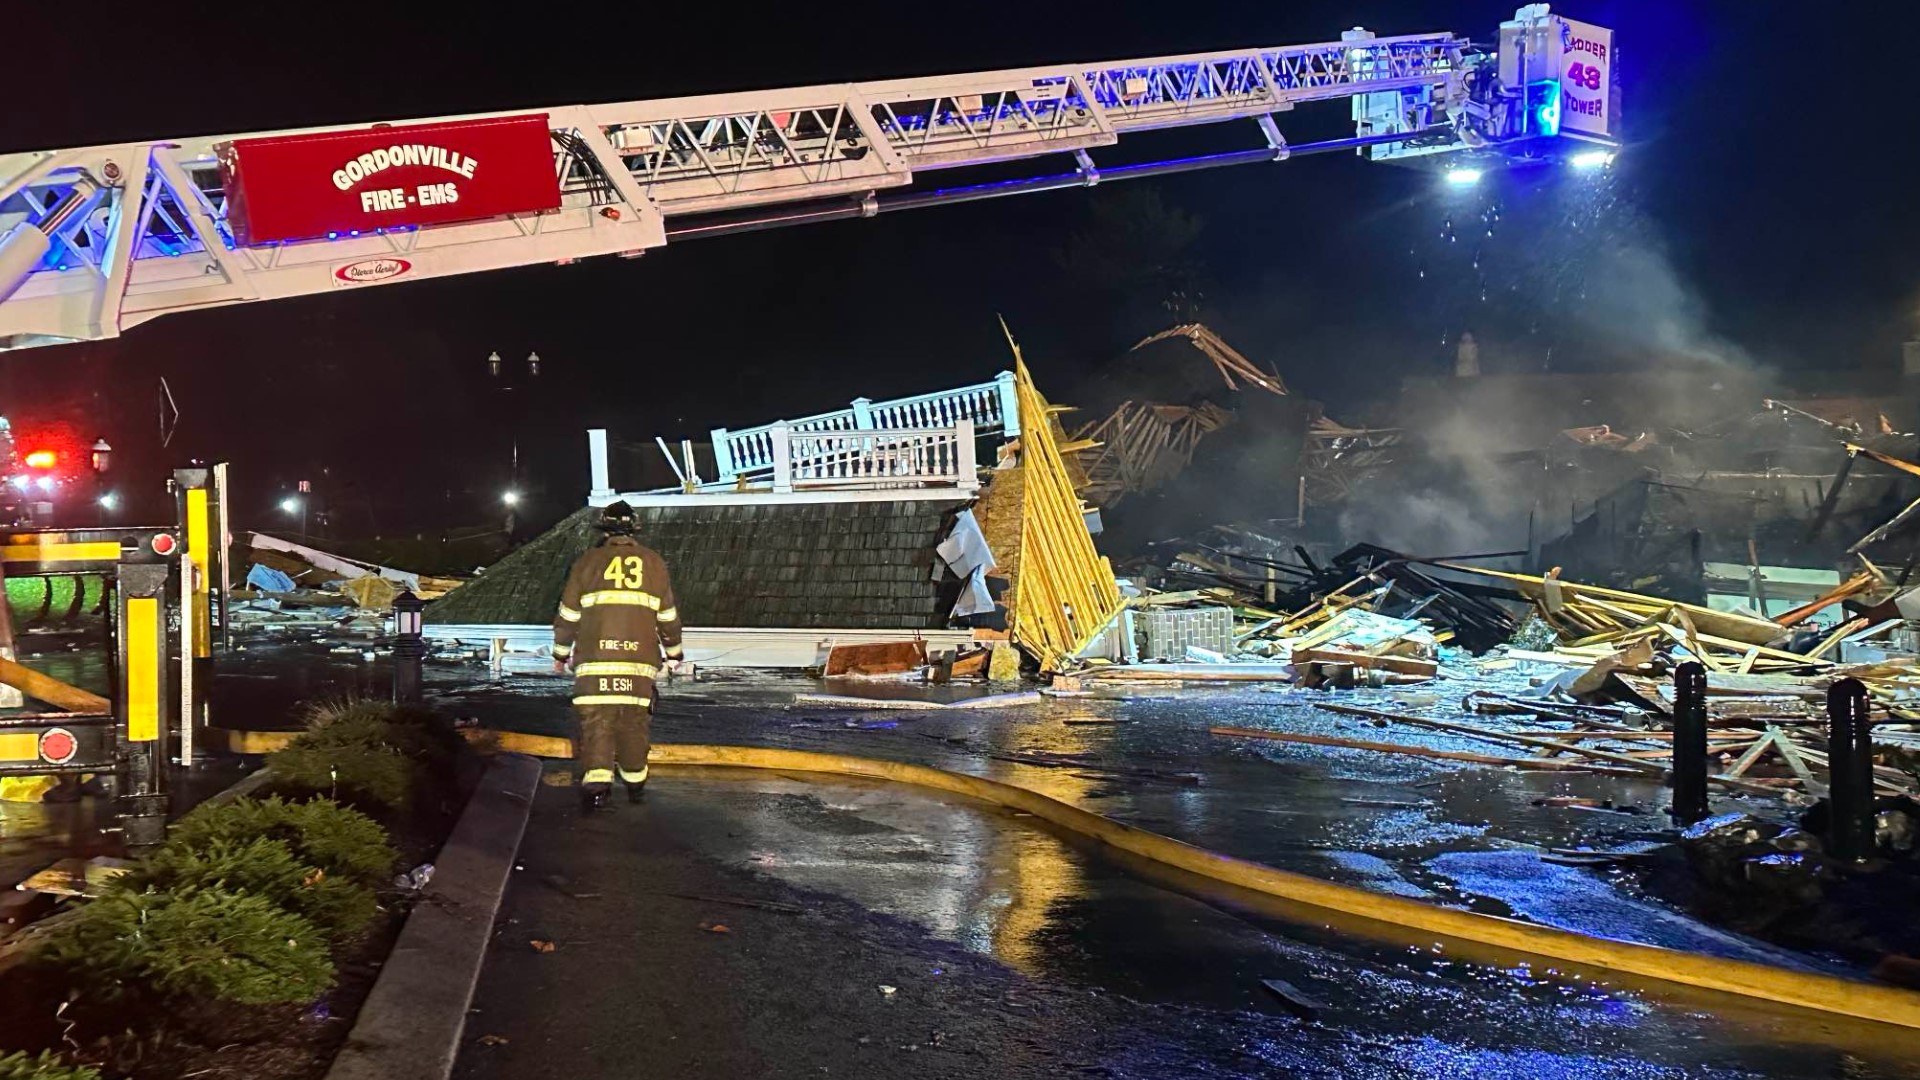 The explosion blew the Bird-in-Hand Family Inn's roof completely off the building.